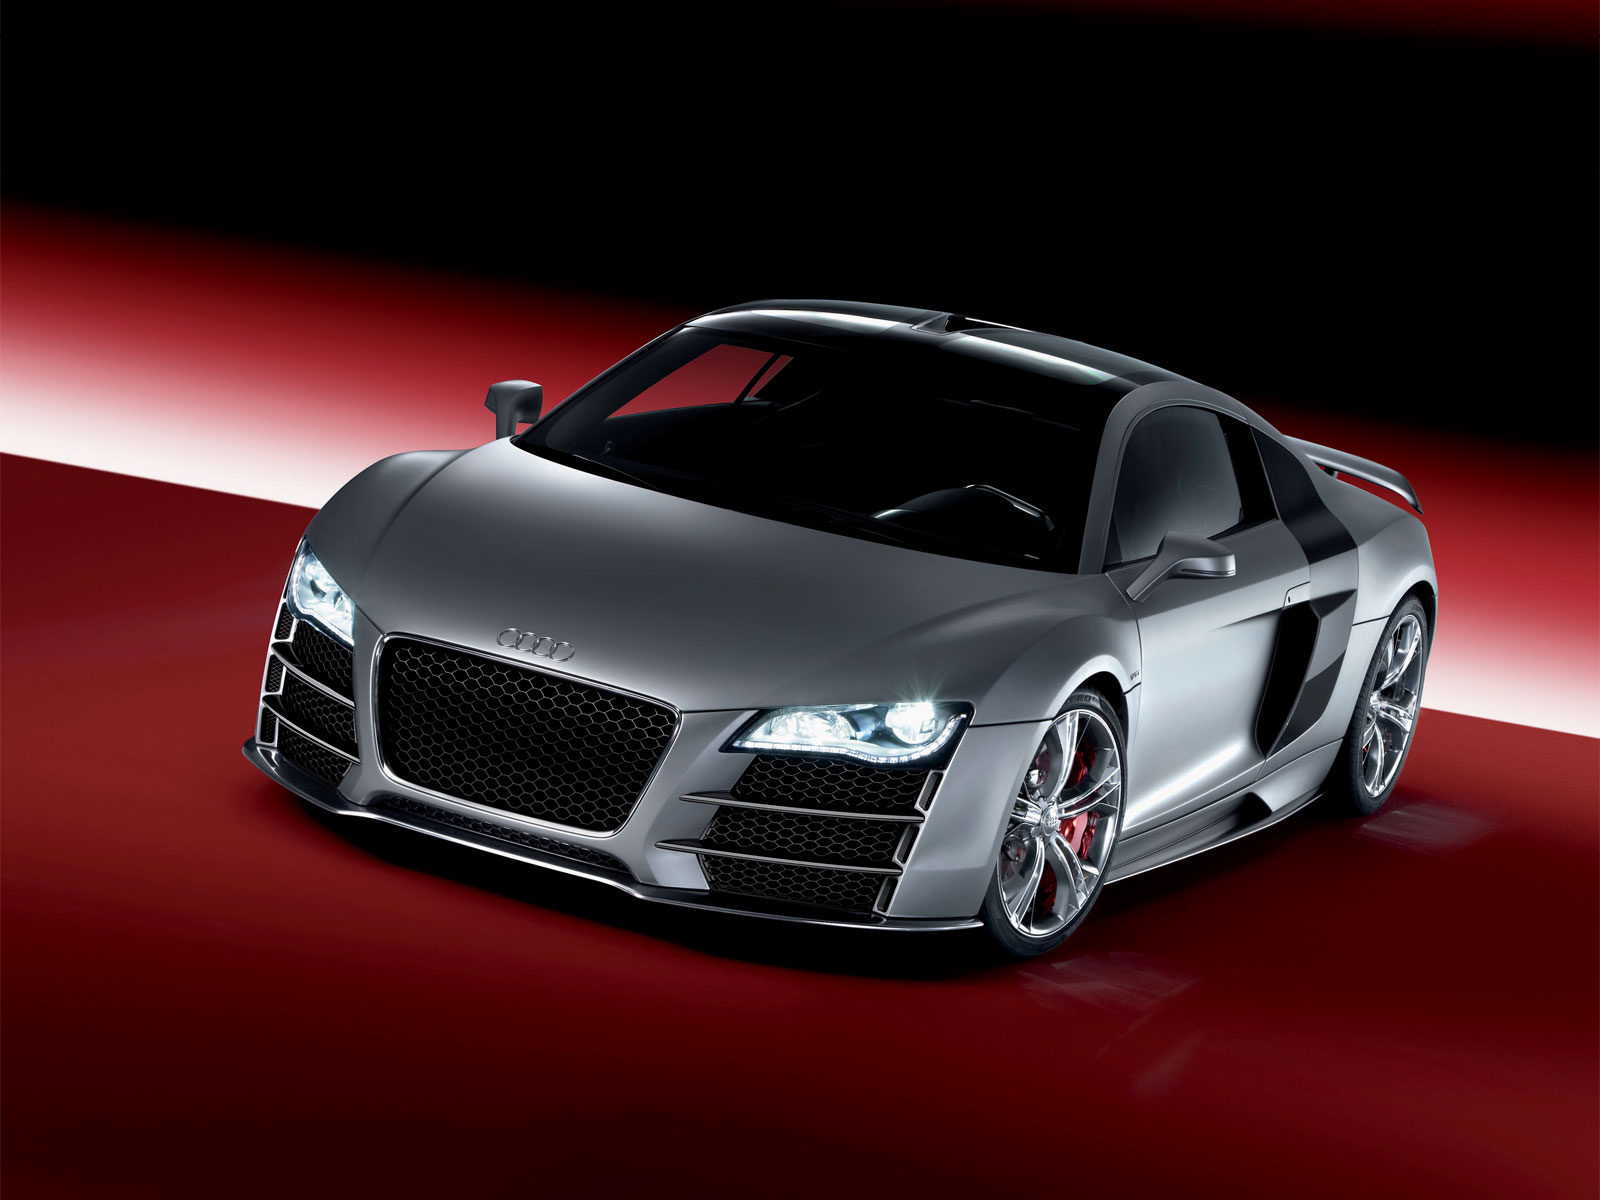 hd car wallpapers is the no 1 source of car wallpapers